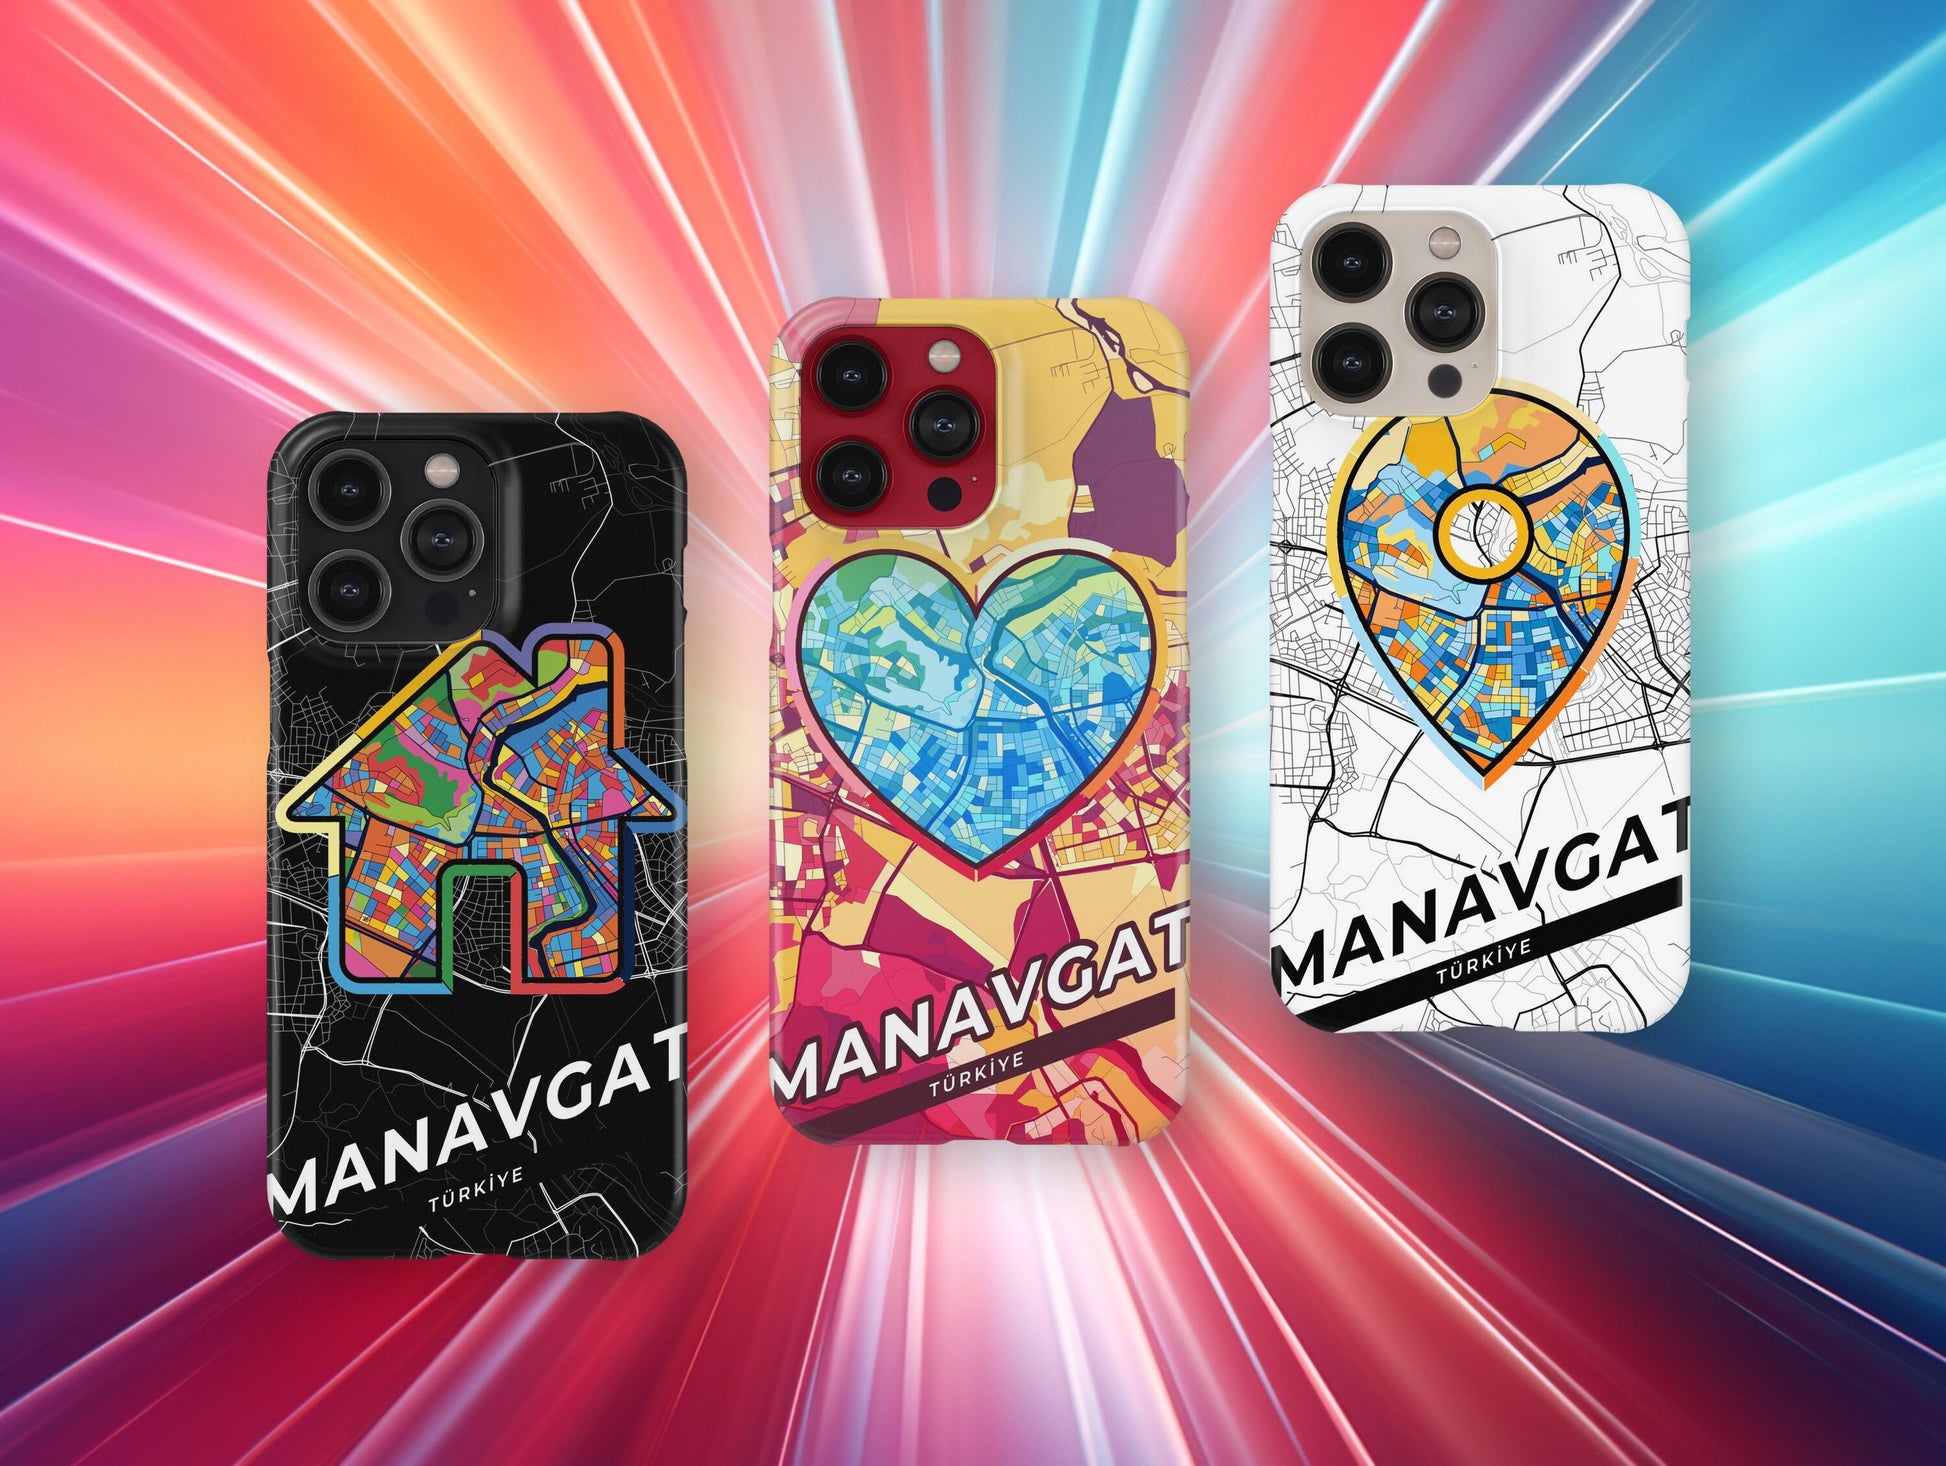 Manavgat Turkey slim phone case with colorful icon. Birthday, wedding or housewarming gift. Couple match cases.